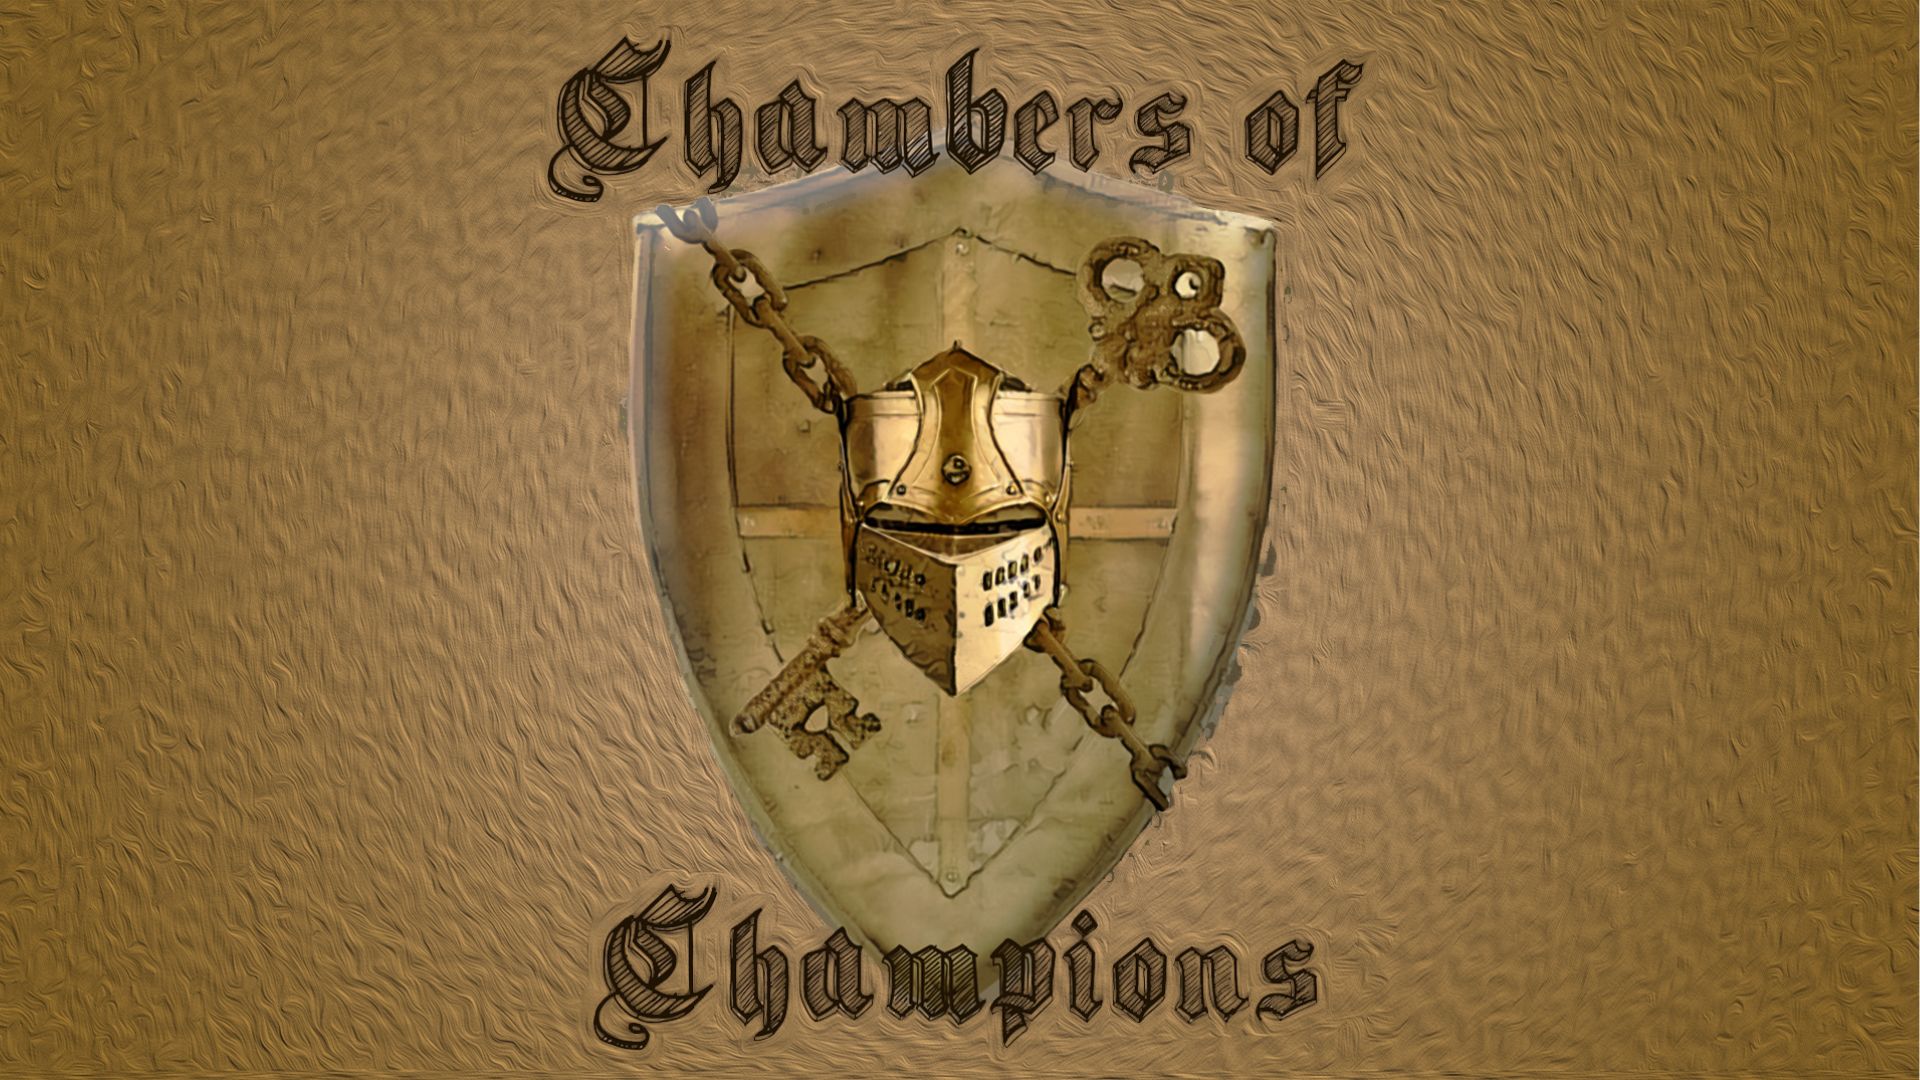 6 persons - Chambers of Champions